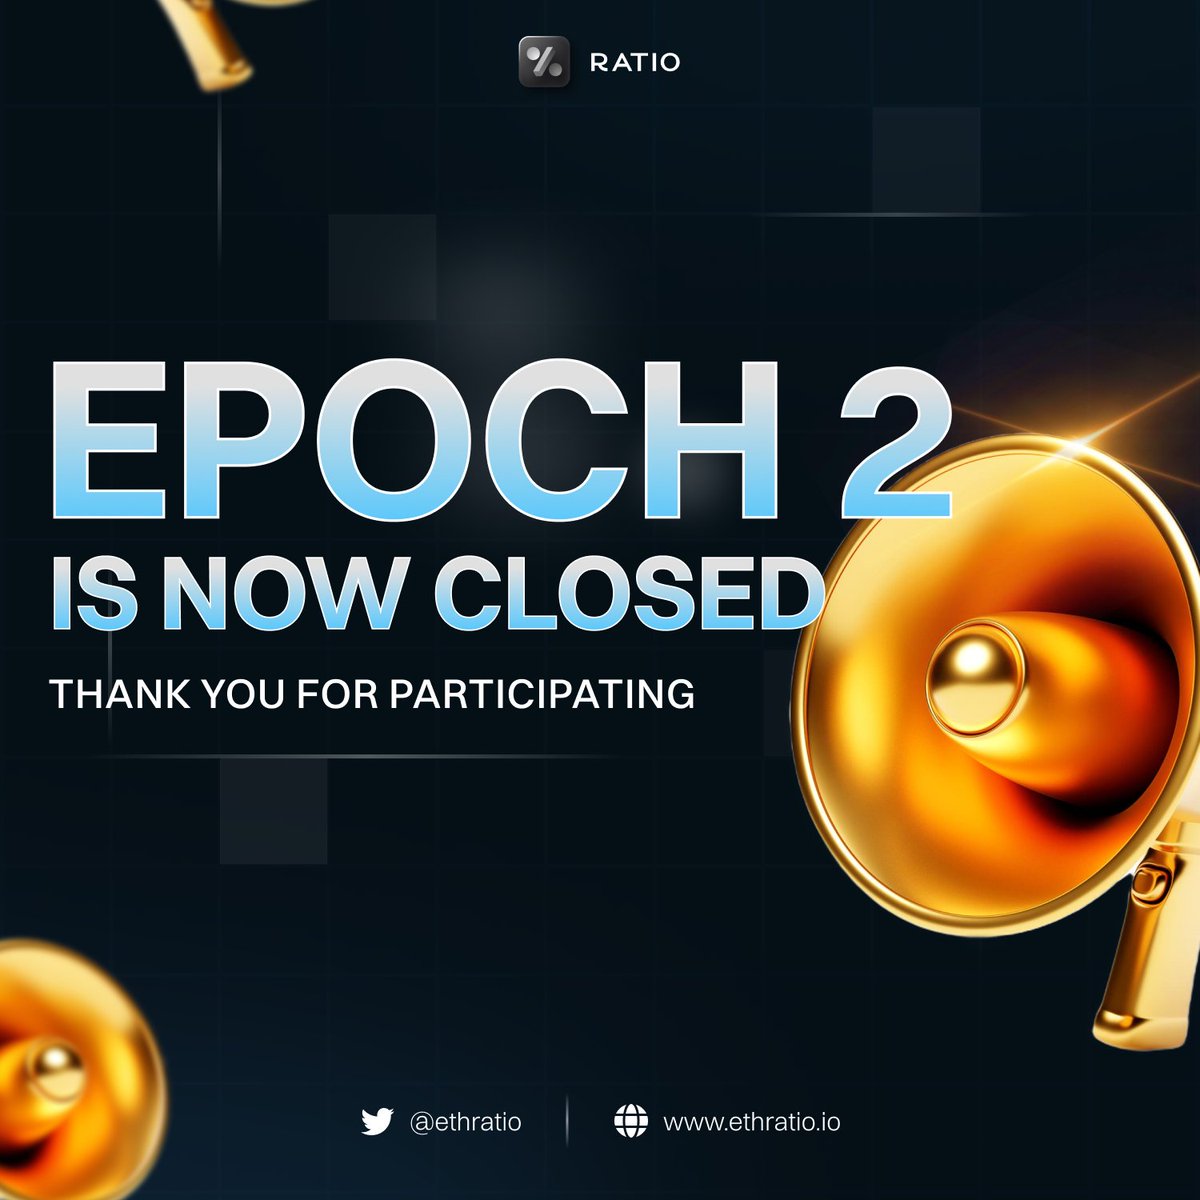 Epoch 2 is now closed | $RATIO Thank you to all who participated. Wallet submissions will open shortly.